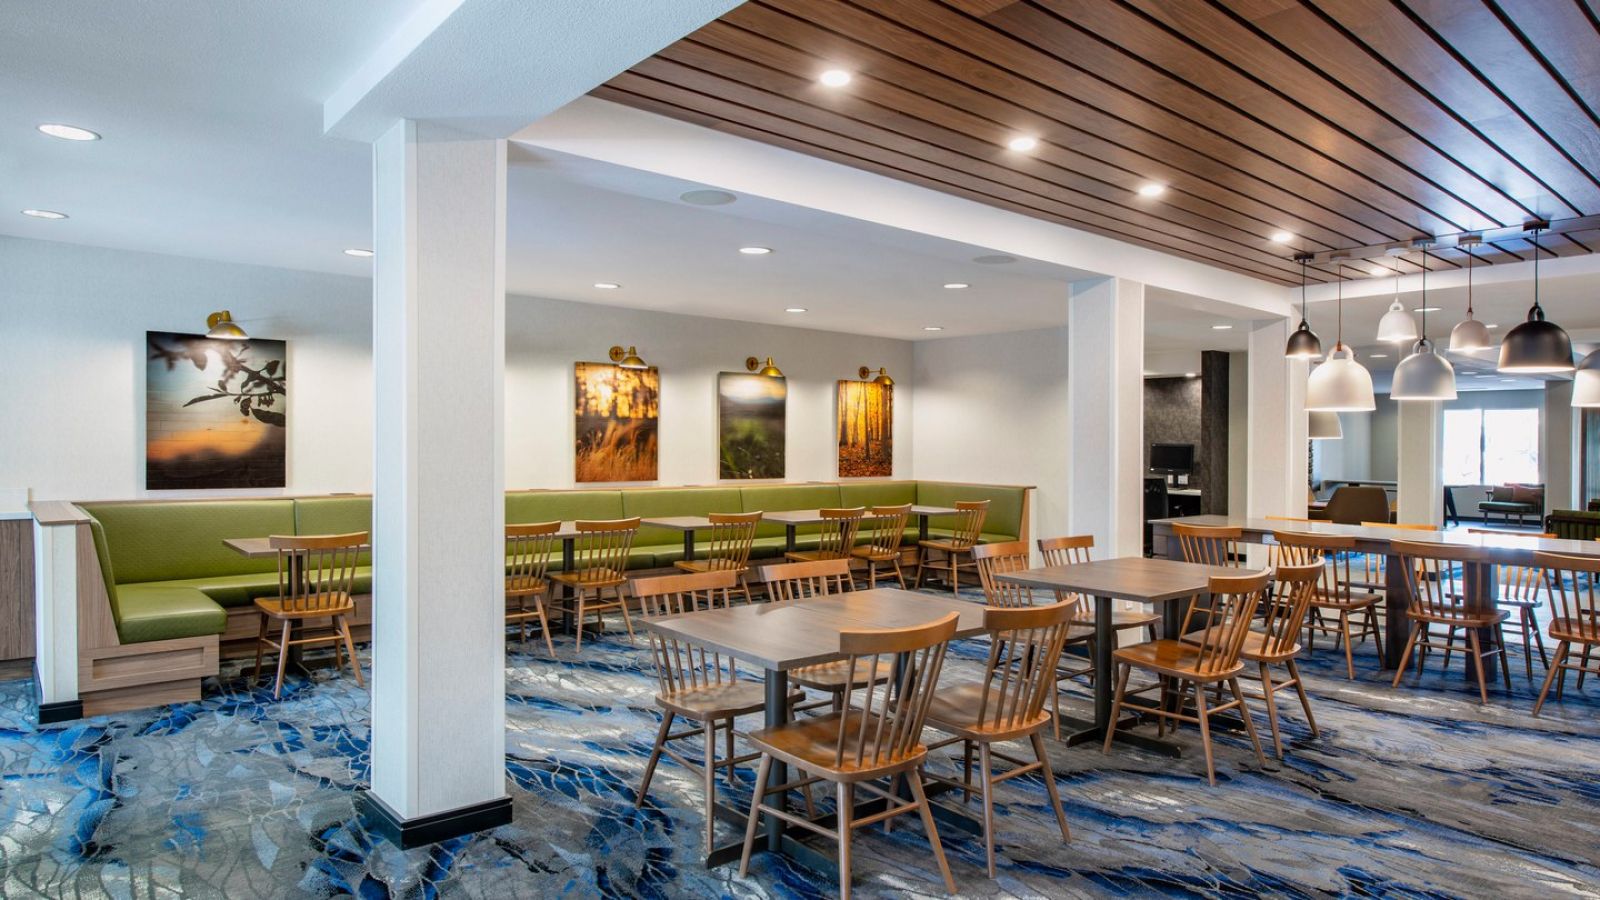 Enjoy a complimentary morning meal each day in our newly renovated breakfast area, which features ample seating.